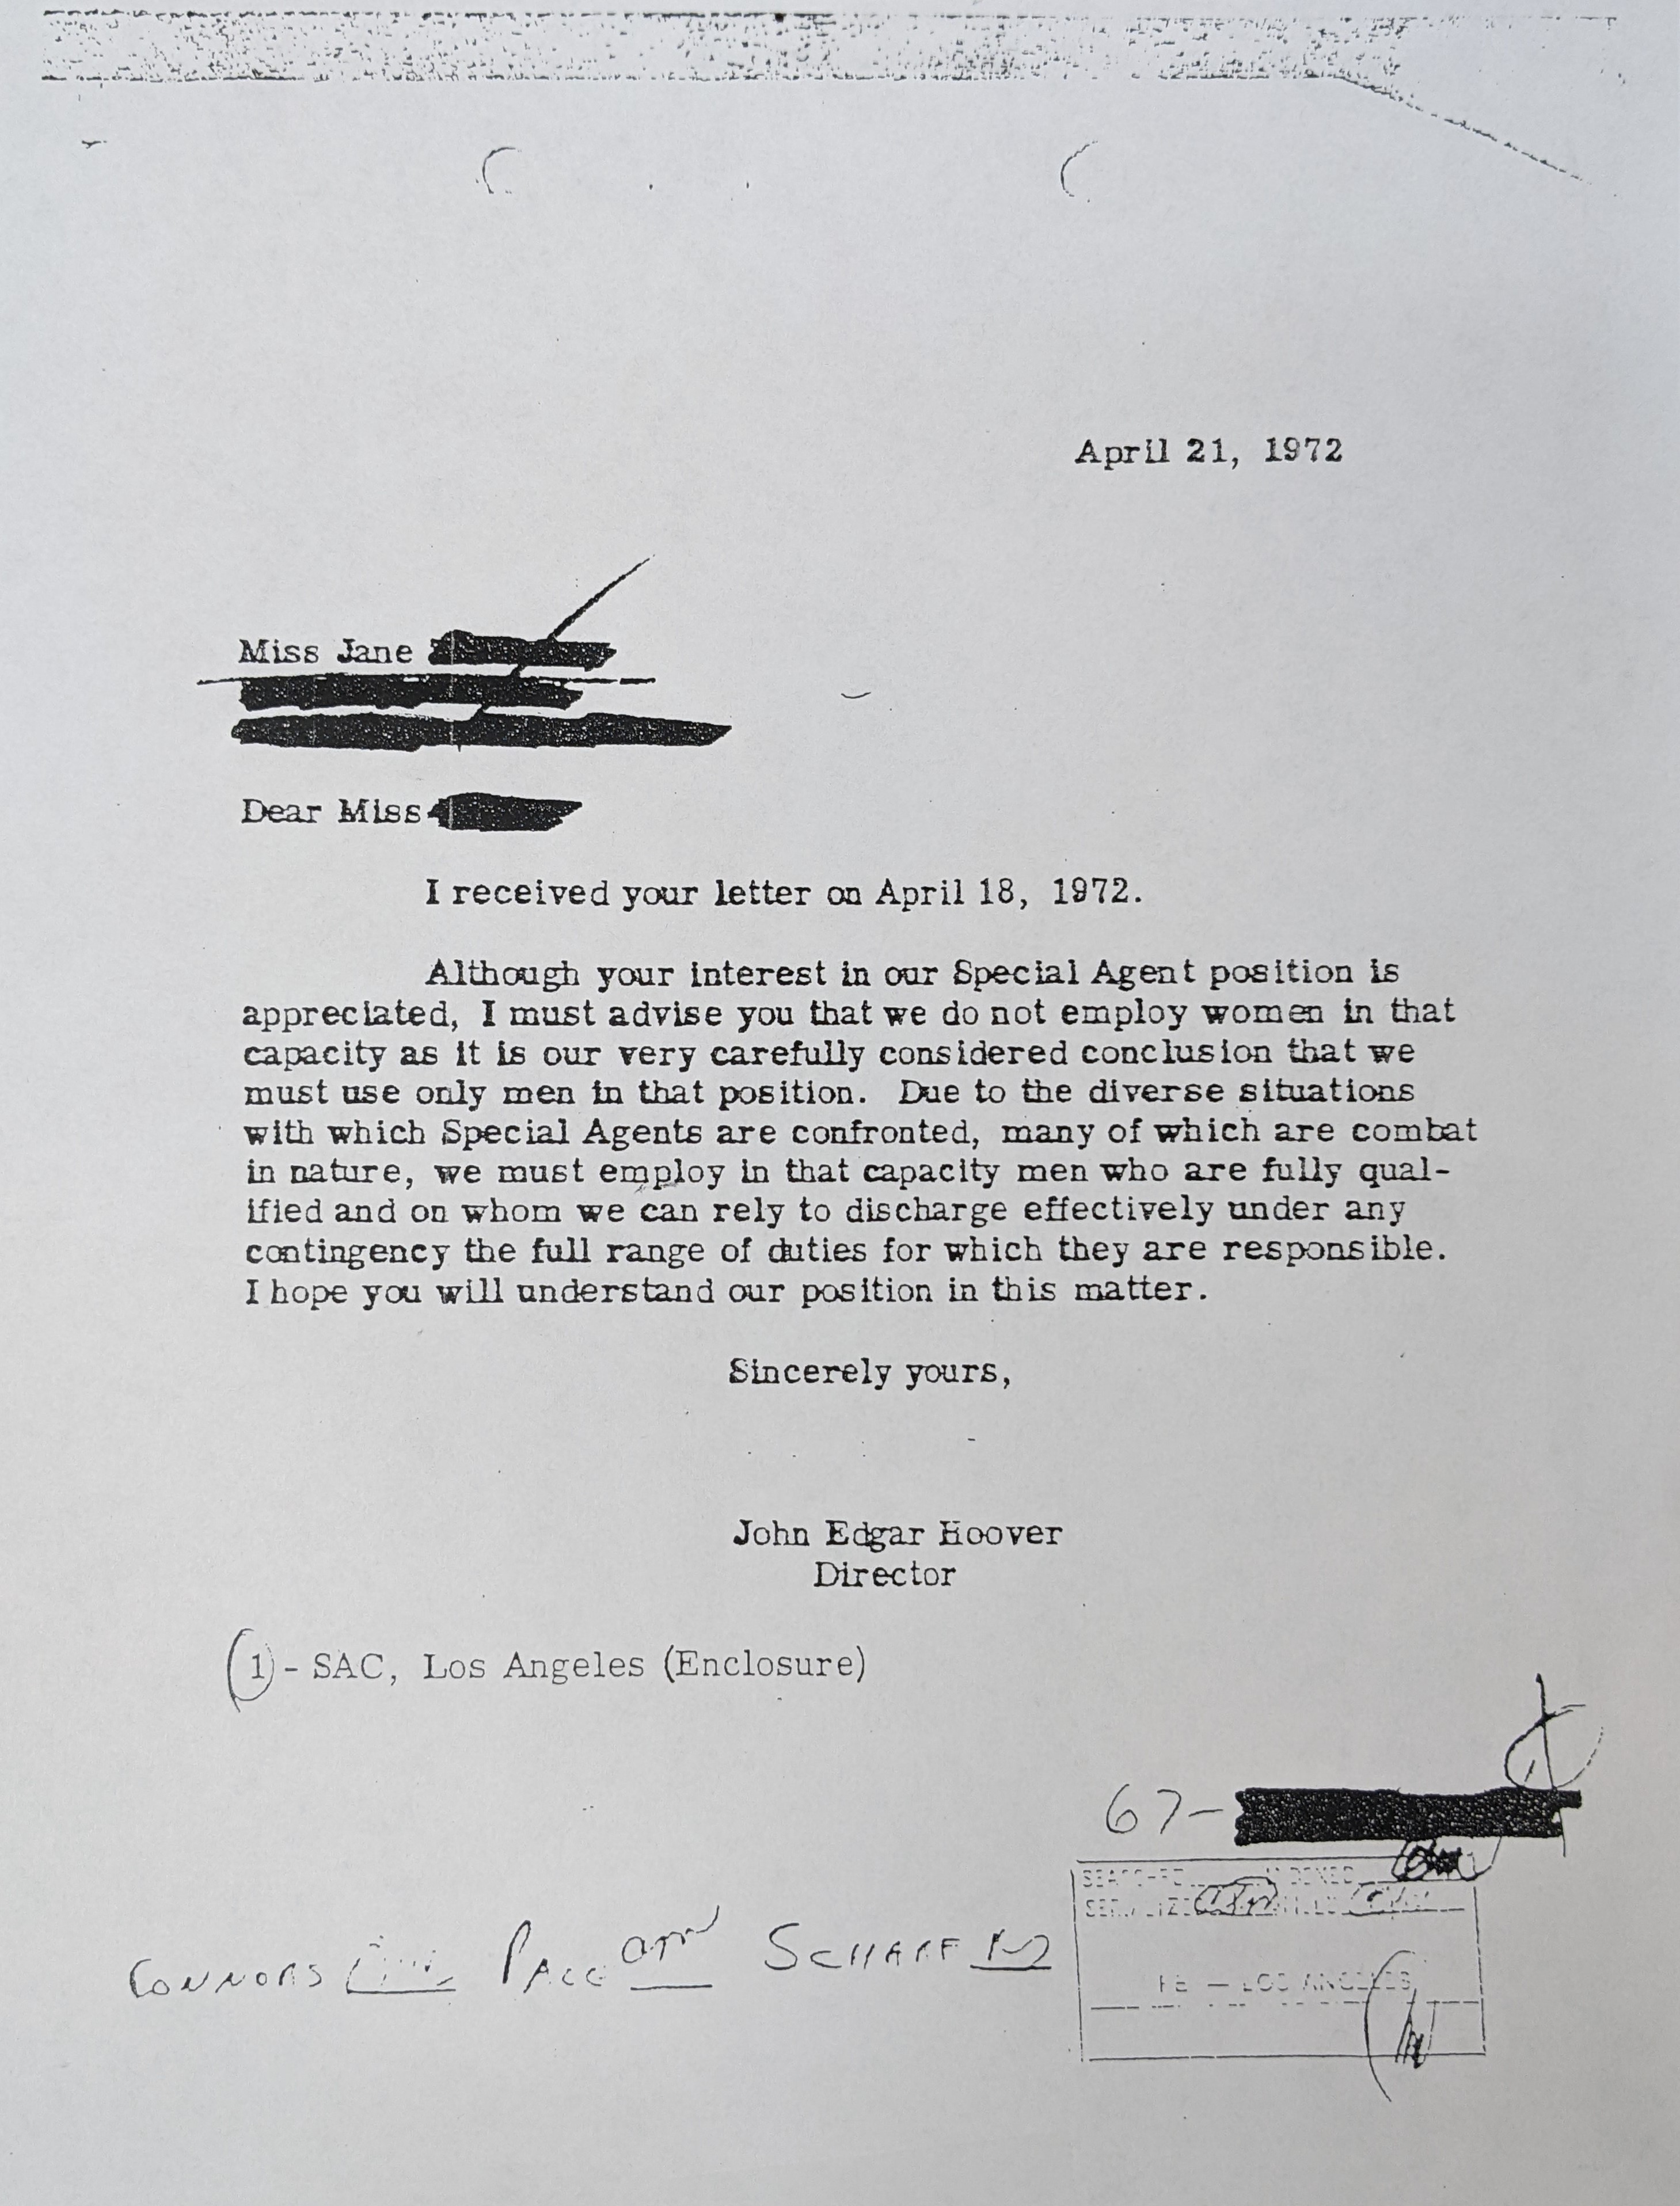 This rejection letter was sent to a female agent applicant in 1972. Weeks later, the FBI began accepting female special agent applicants.